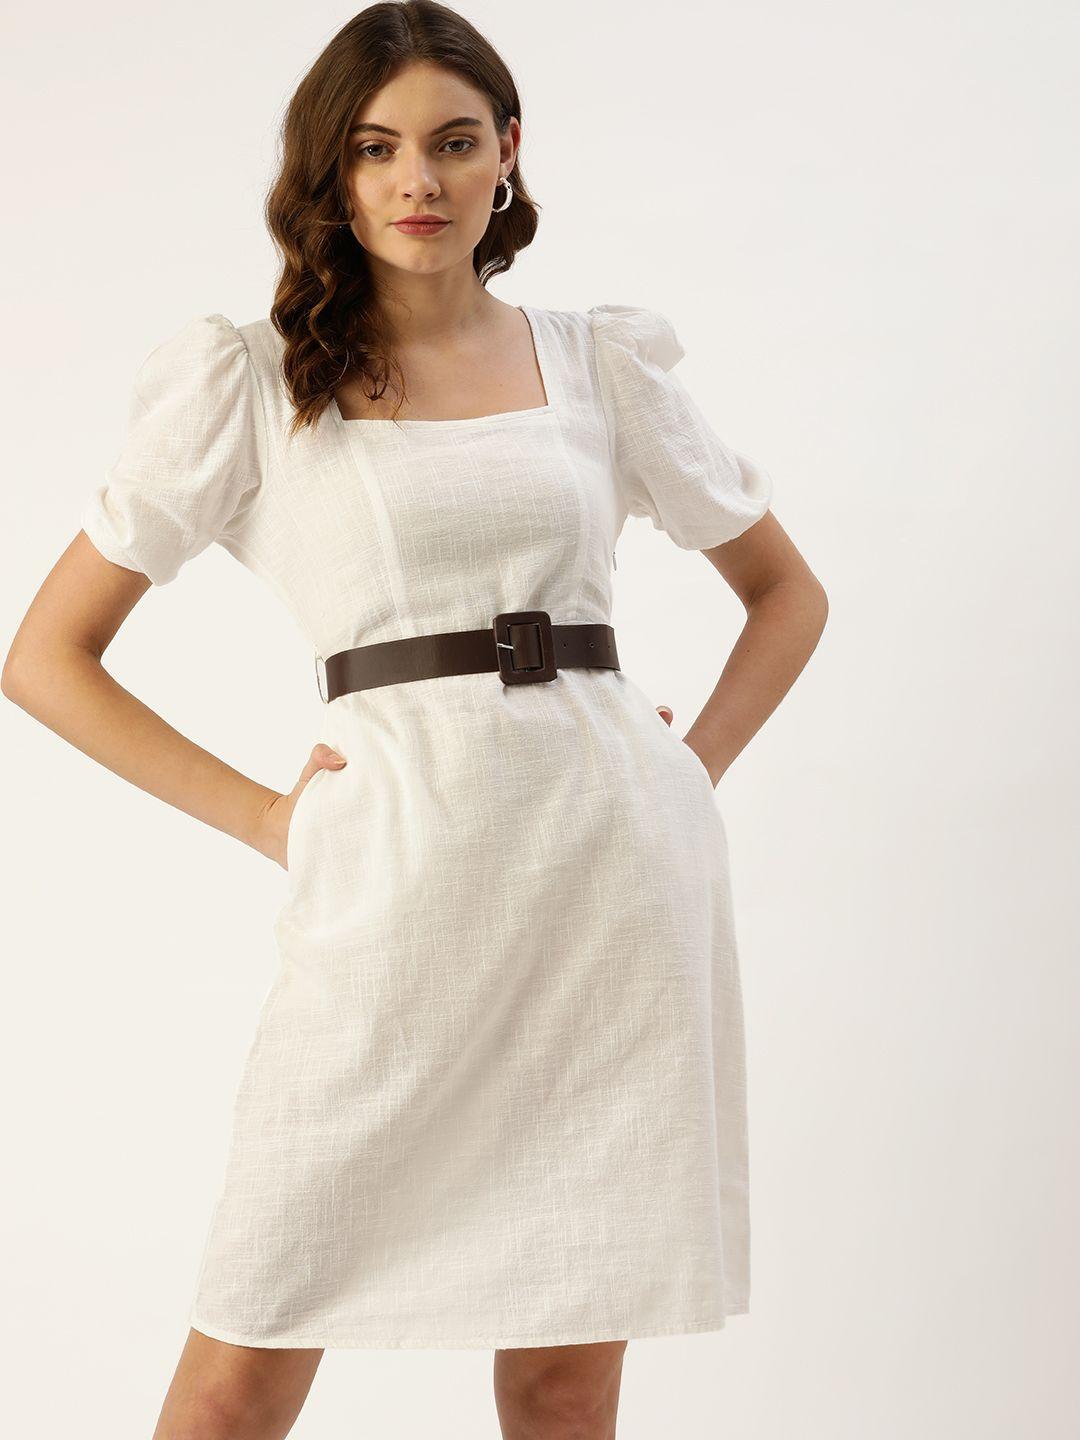 dressberry white solid a-line dress comes with a belt